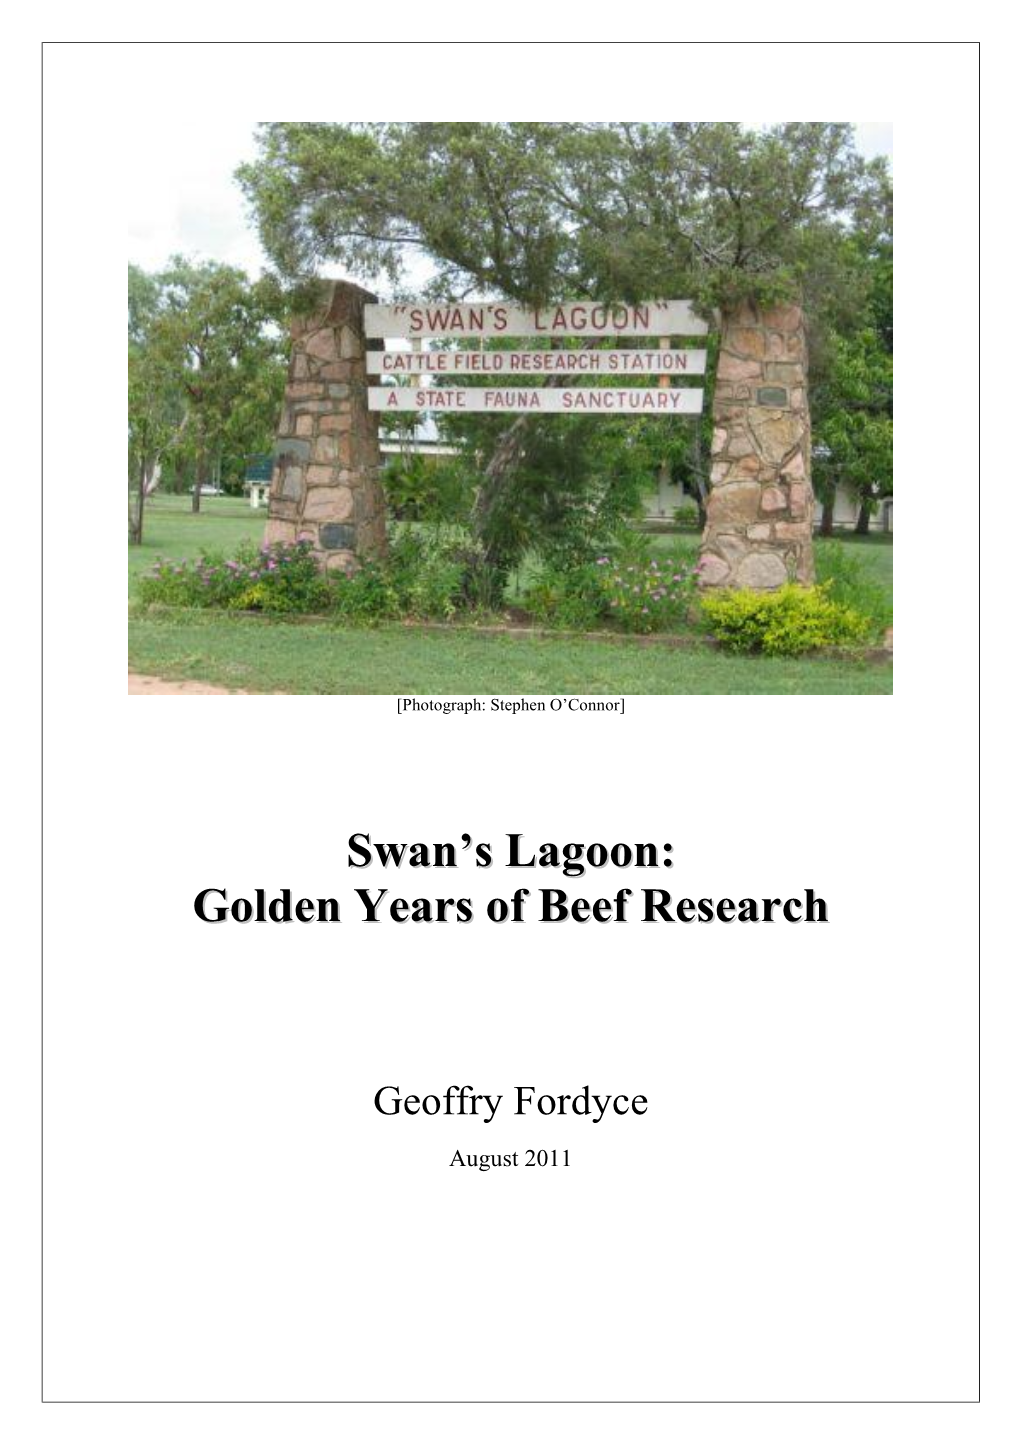 Swan's Lagoon: Golden Years of Beef Research